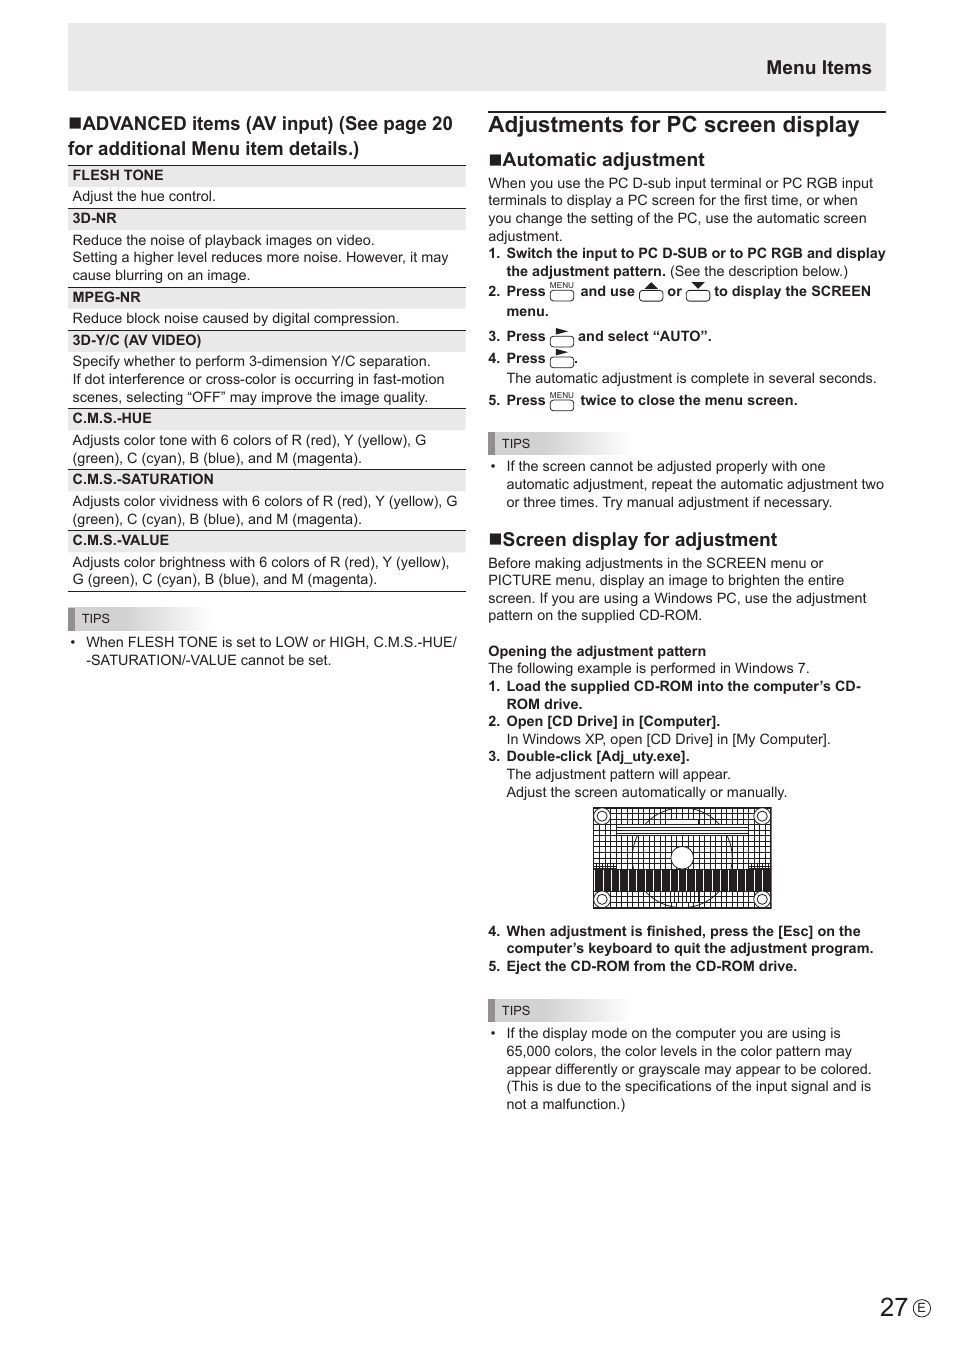 Adjustments for pc screen display, Nautomatic adjustment, Nscreen display for adjustment | Menu items | Sharp PN-E802 User Manual | Page 27 / 56